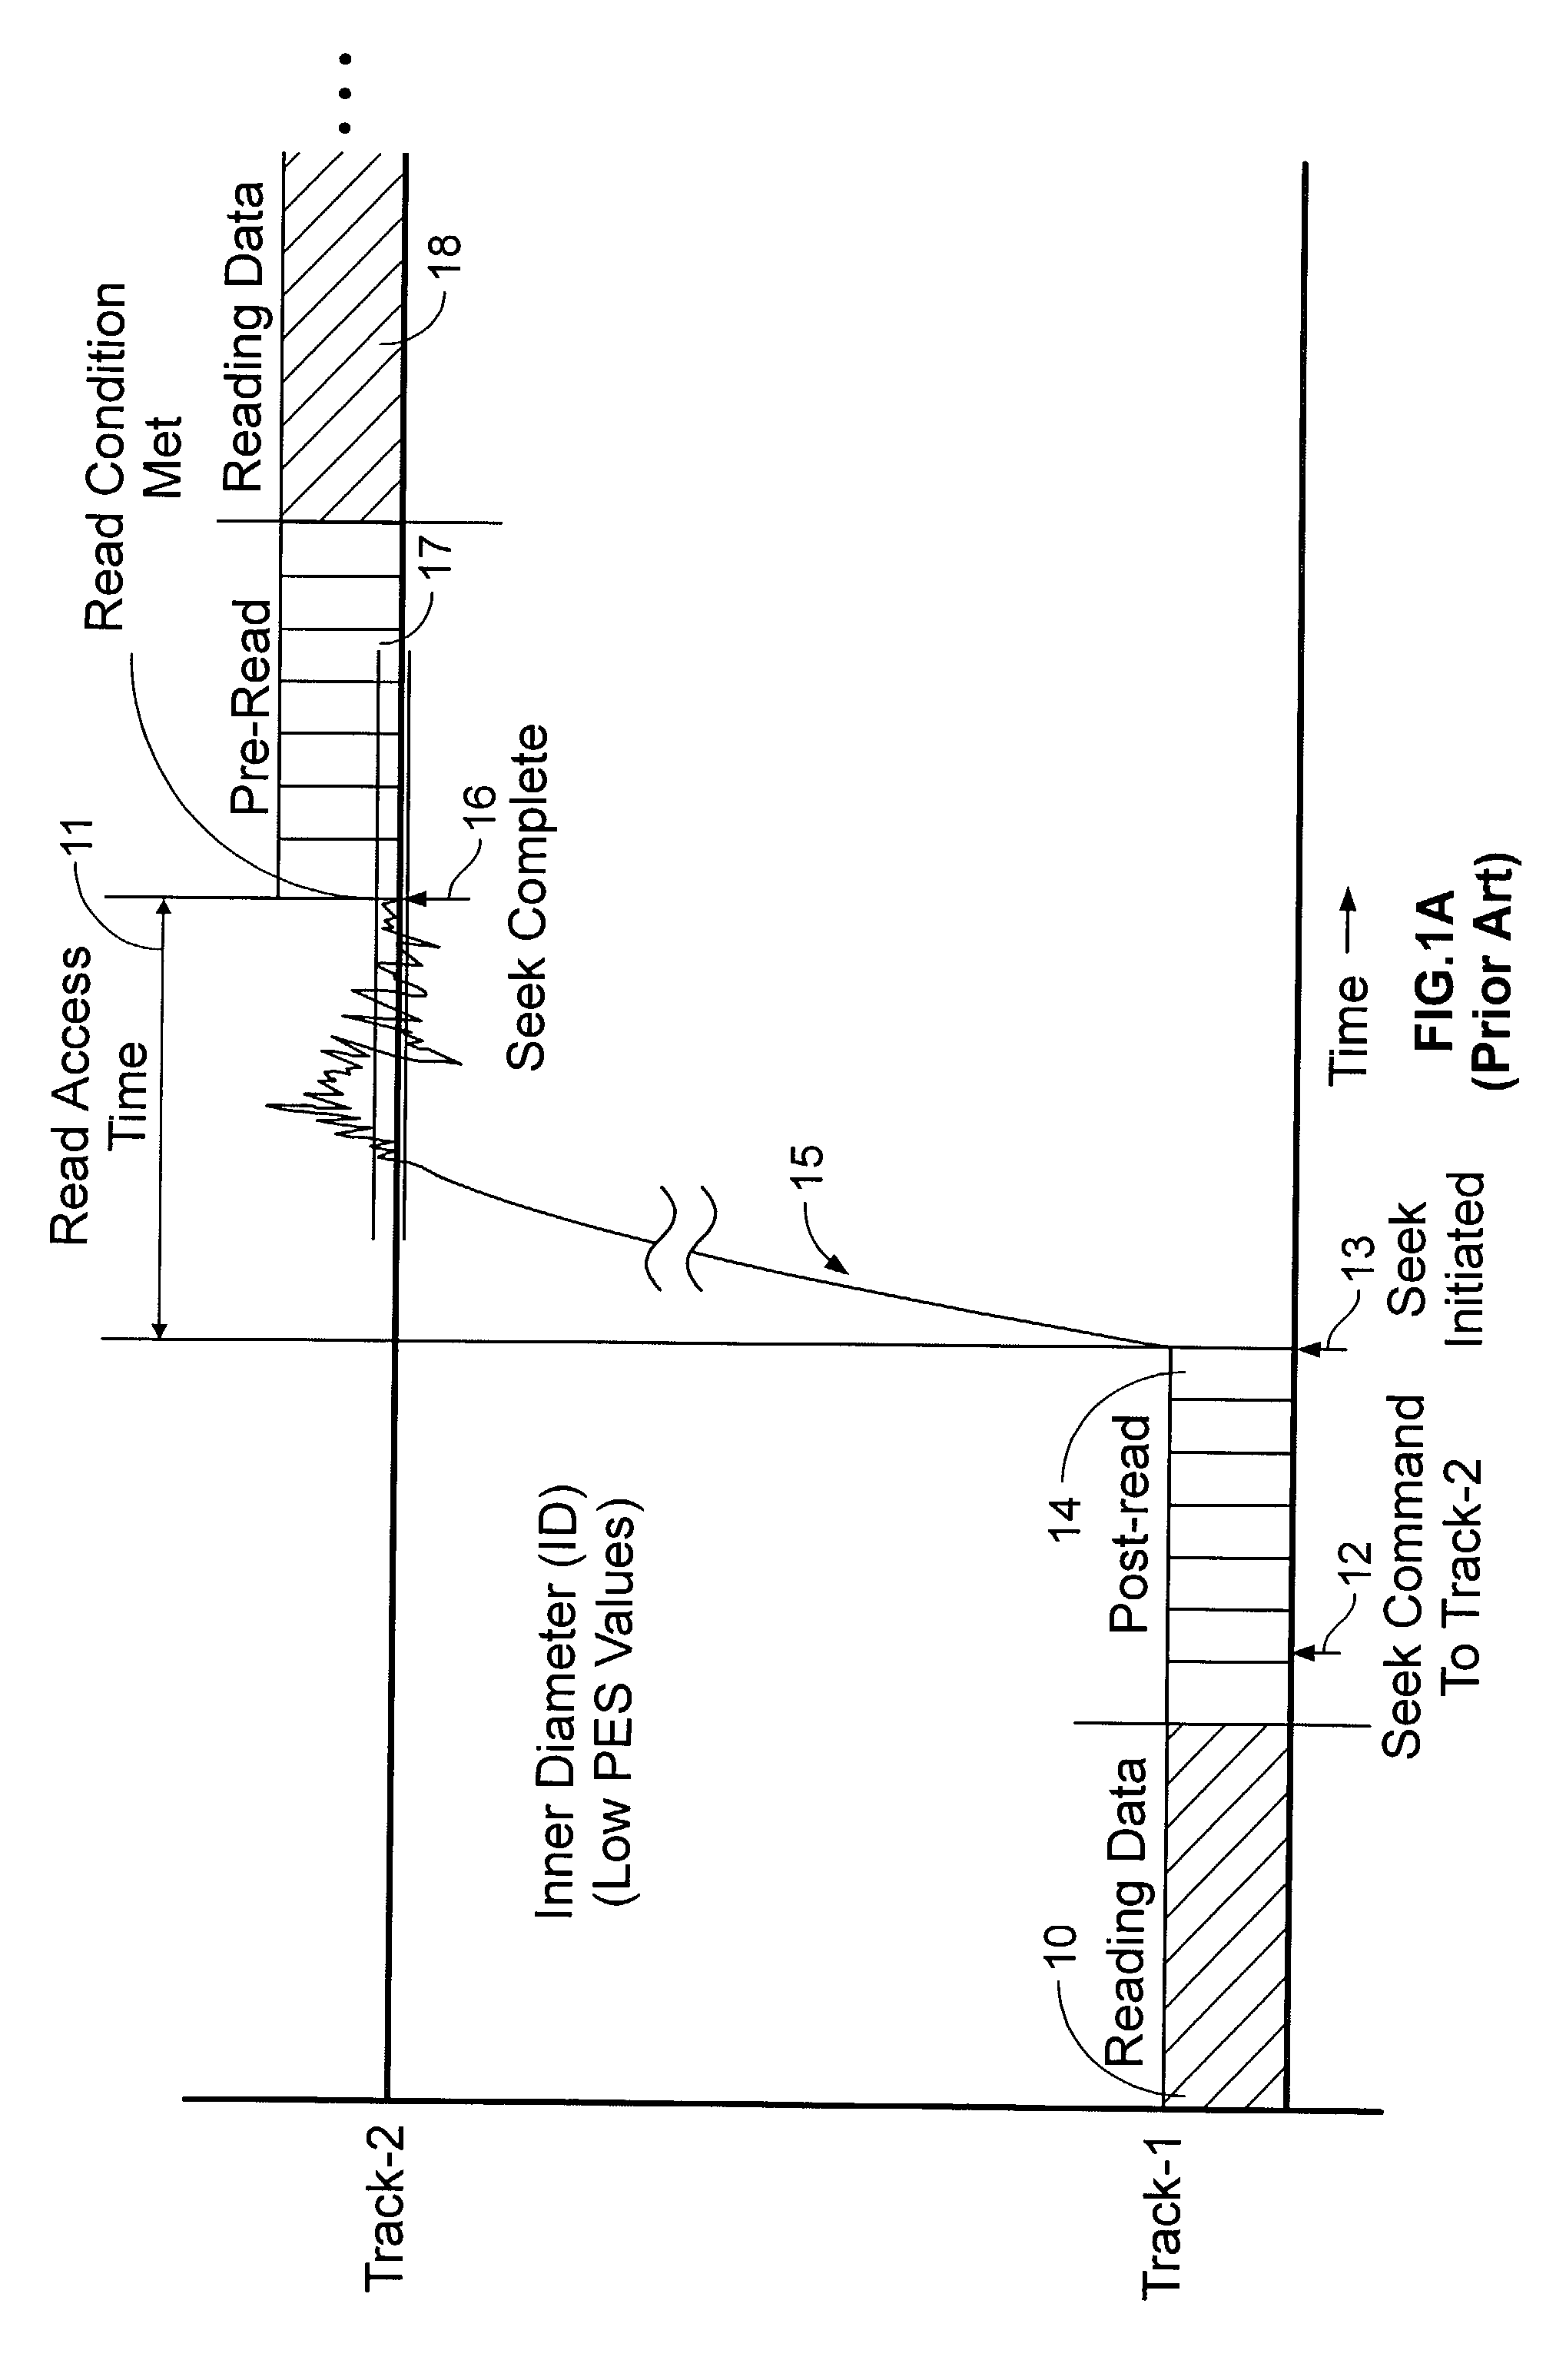 Adaptively estimating a read access time to a second track based upon the binned radial position of the second track within a rotating media storage device